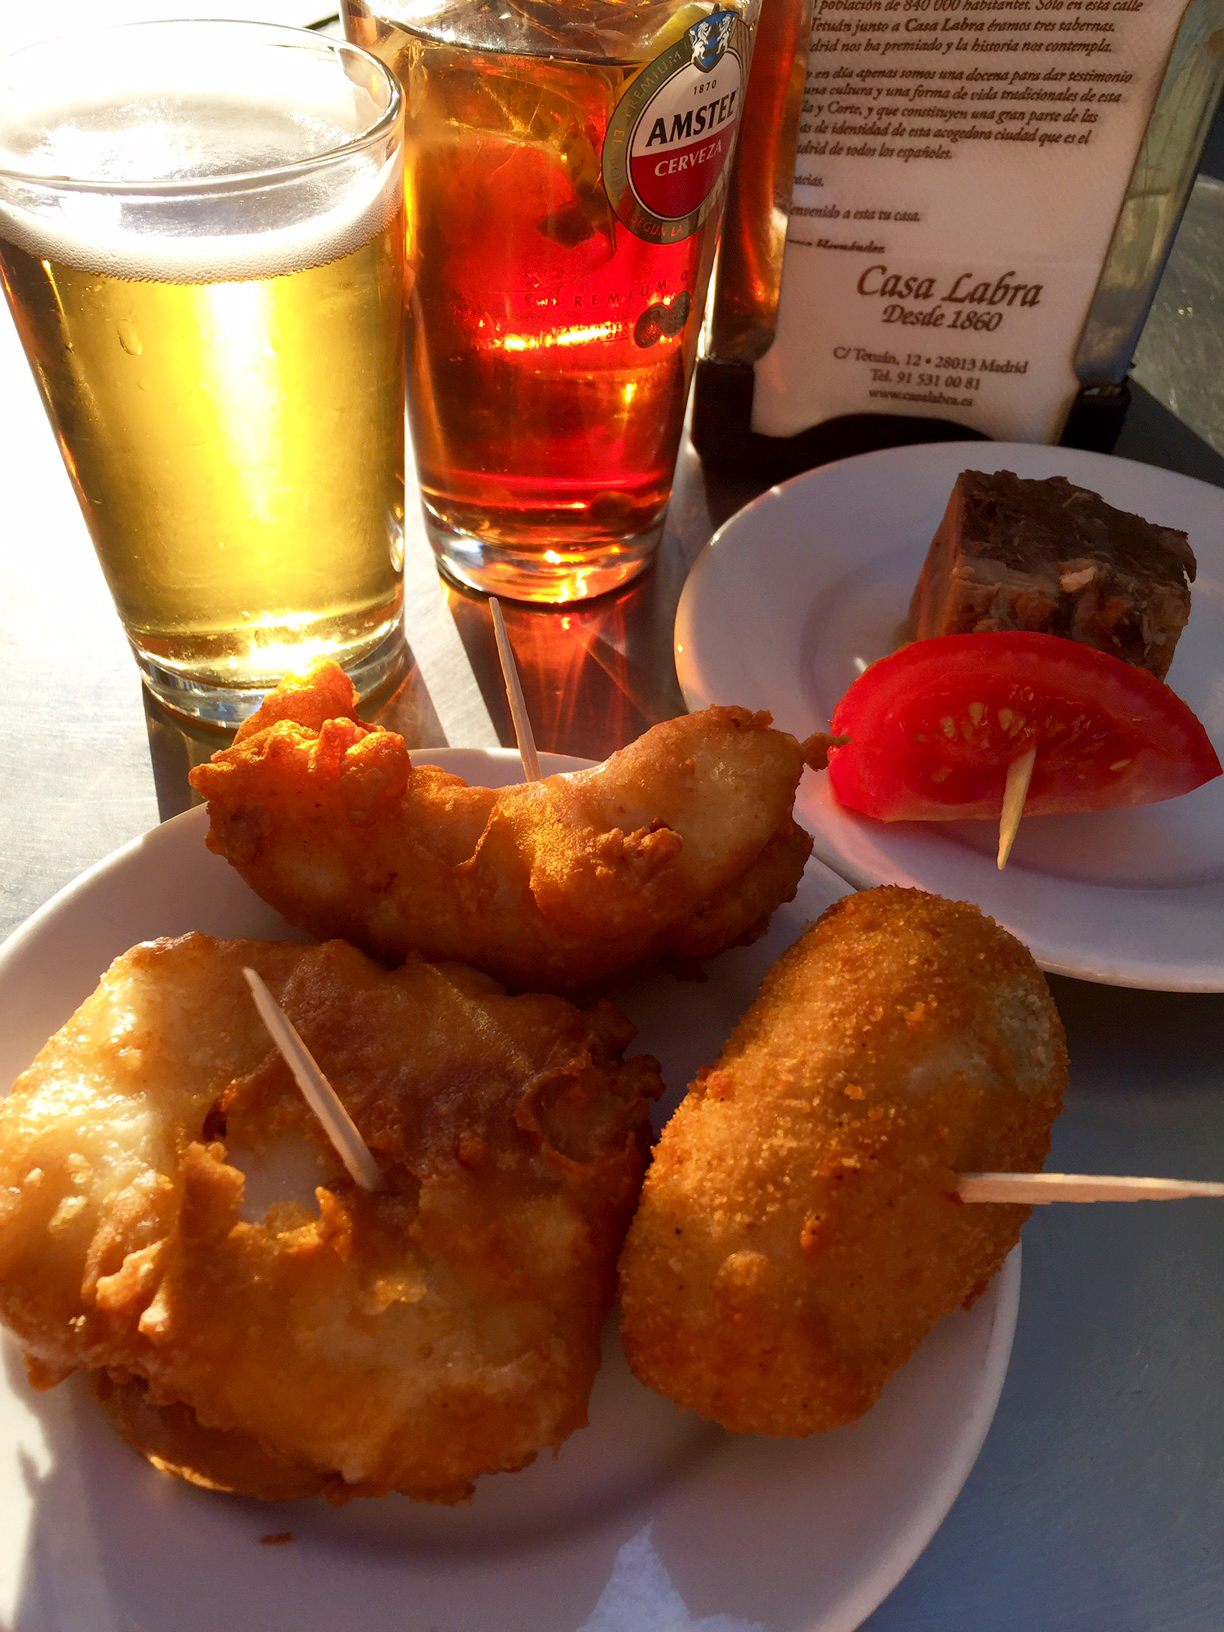 Travel Madrid A Madrileño S Food Guide For The Turista